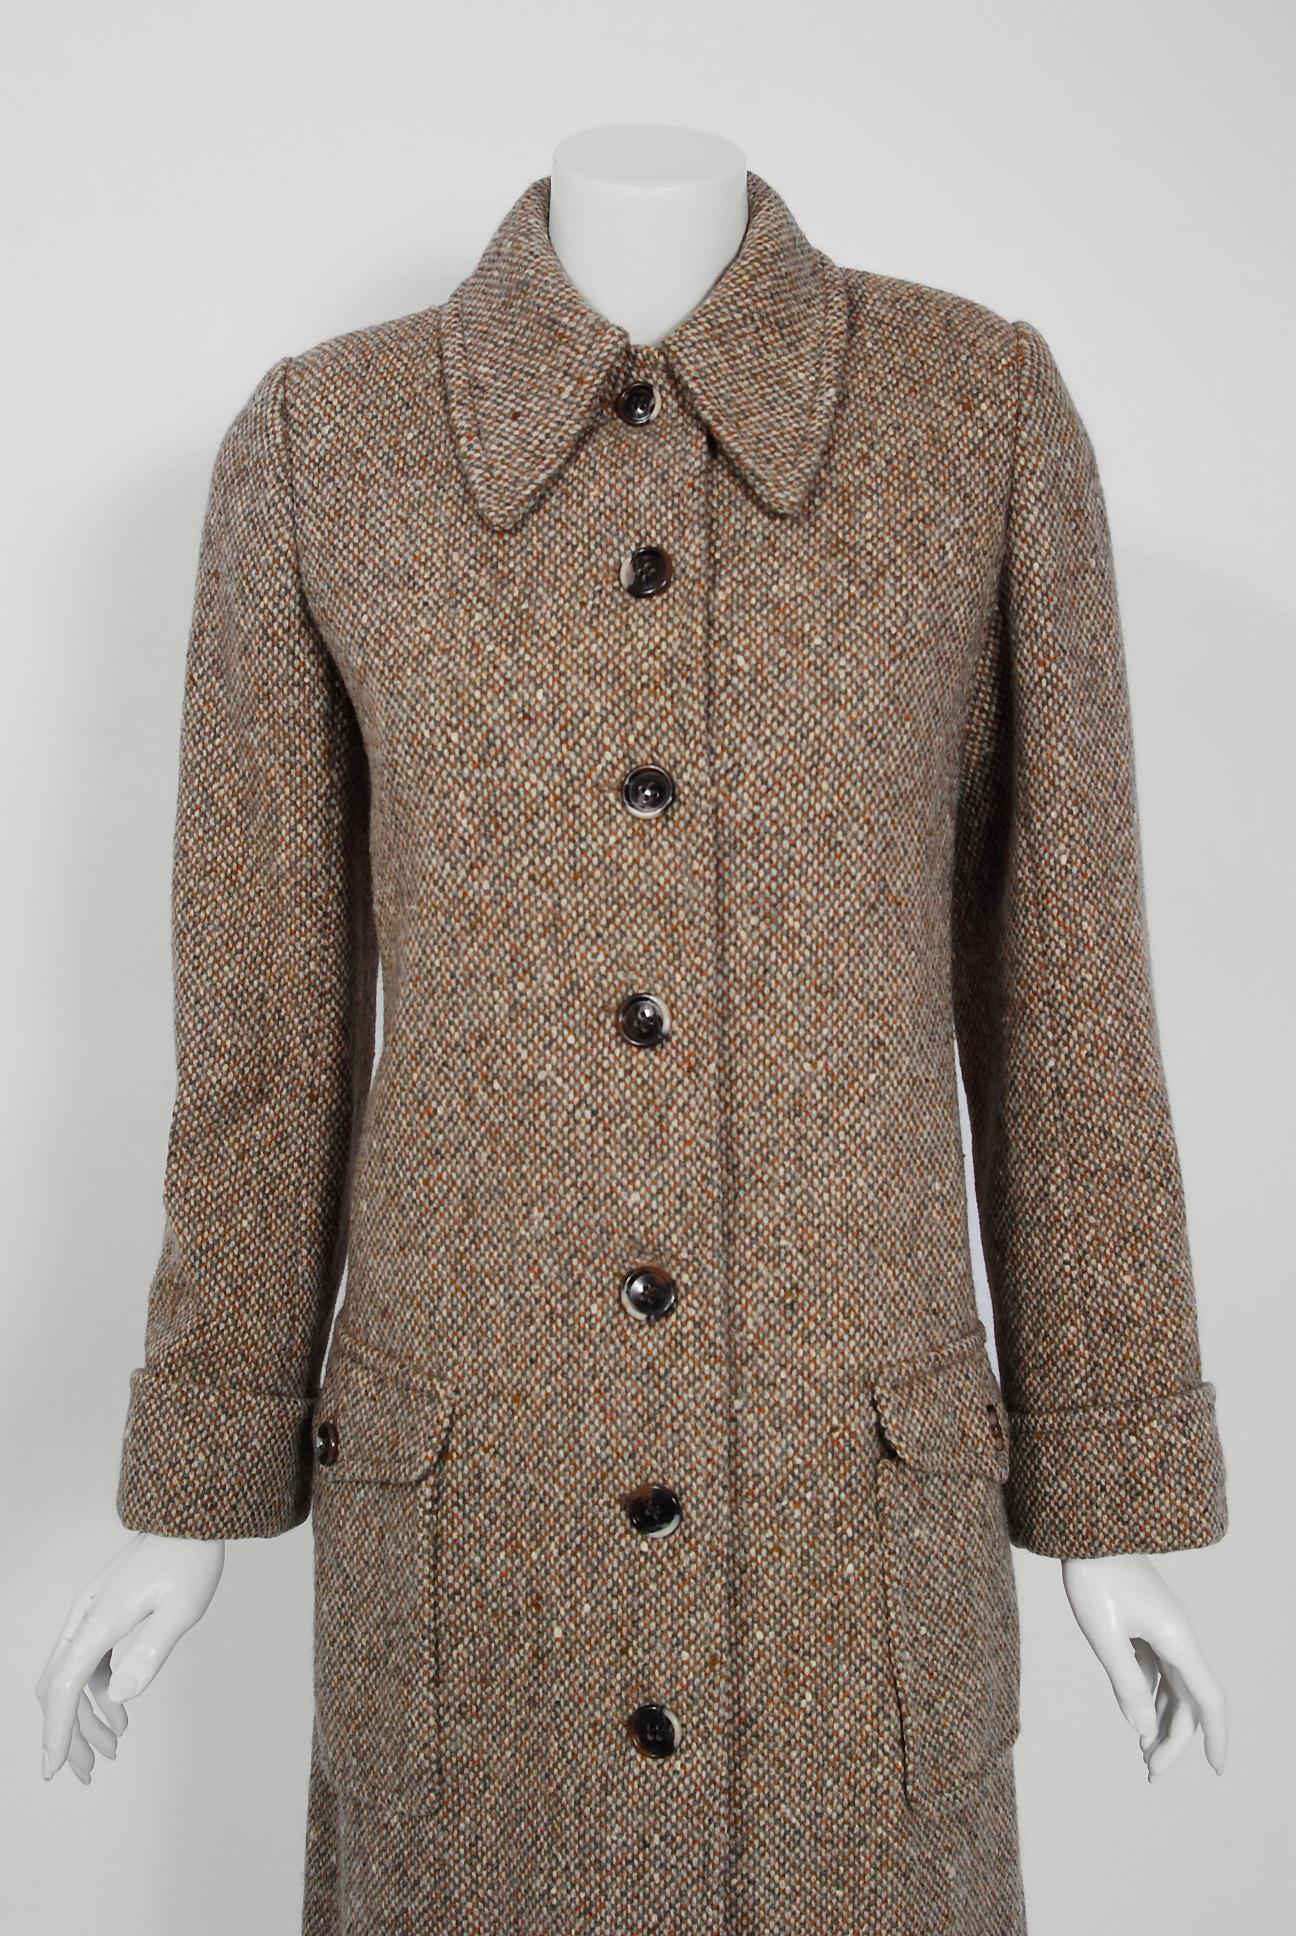 This exceptionally chic autumn brown wool-tweed trench jacket is from the infamous Rive Gauche collection during Fall-Winter 1973. Pieces from this decade are very rare and are true examples of fashion history. I adore the huge over-sized side